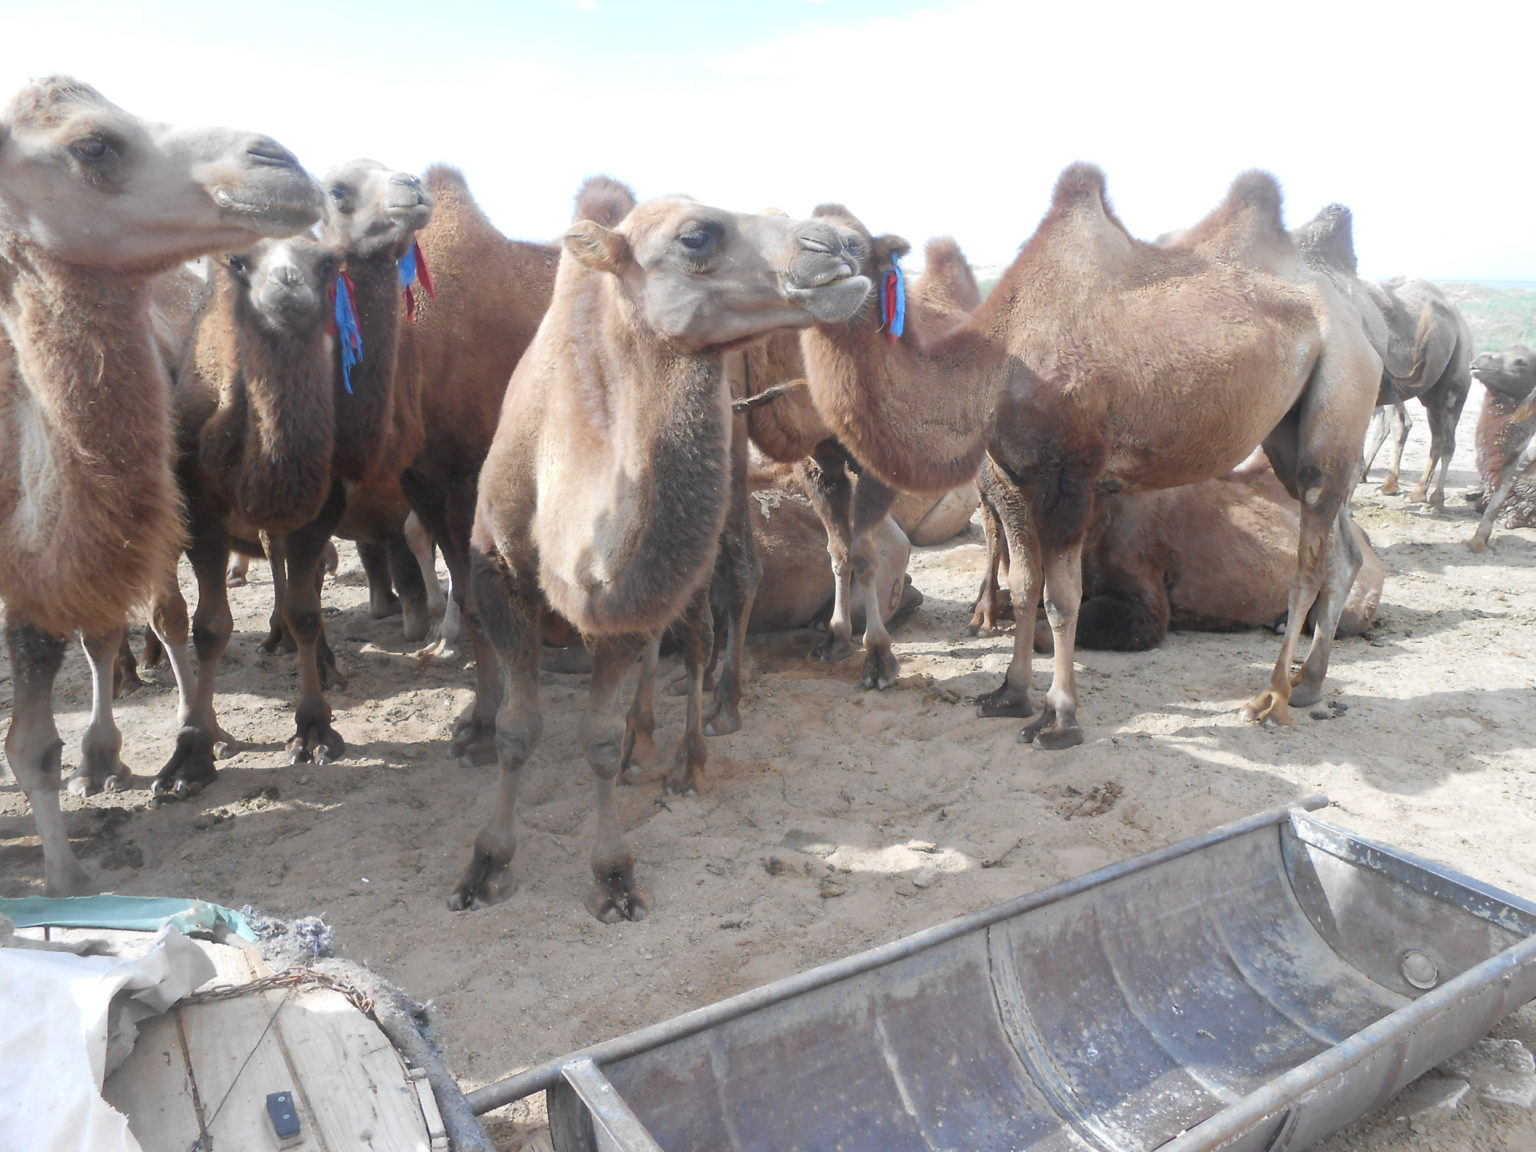 Camel herding is a traditional livelihood in the Gobi desert [Image by: Paul Robinson]